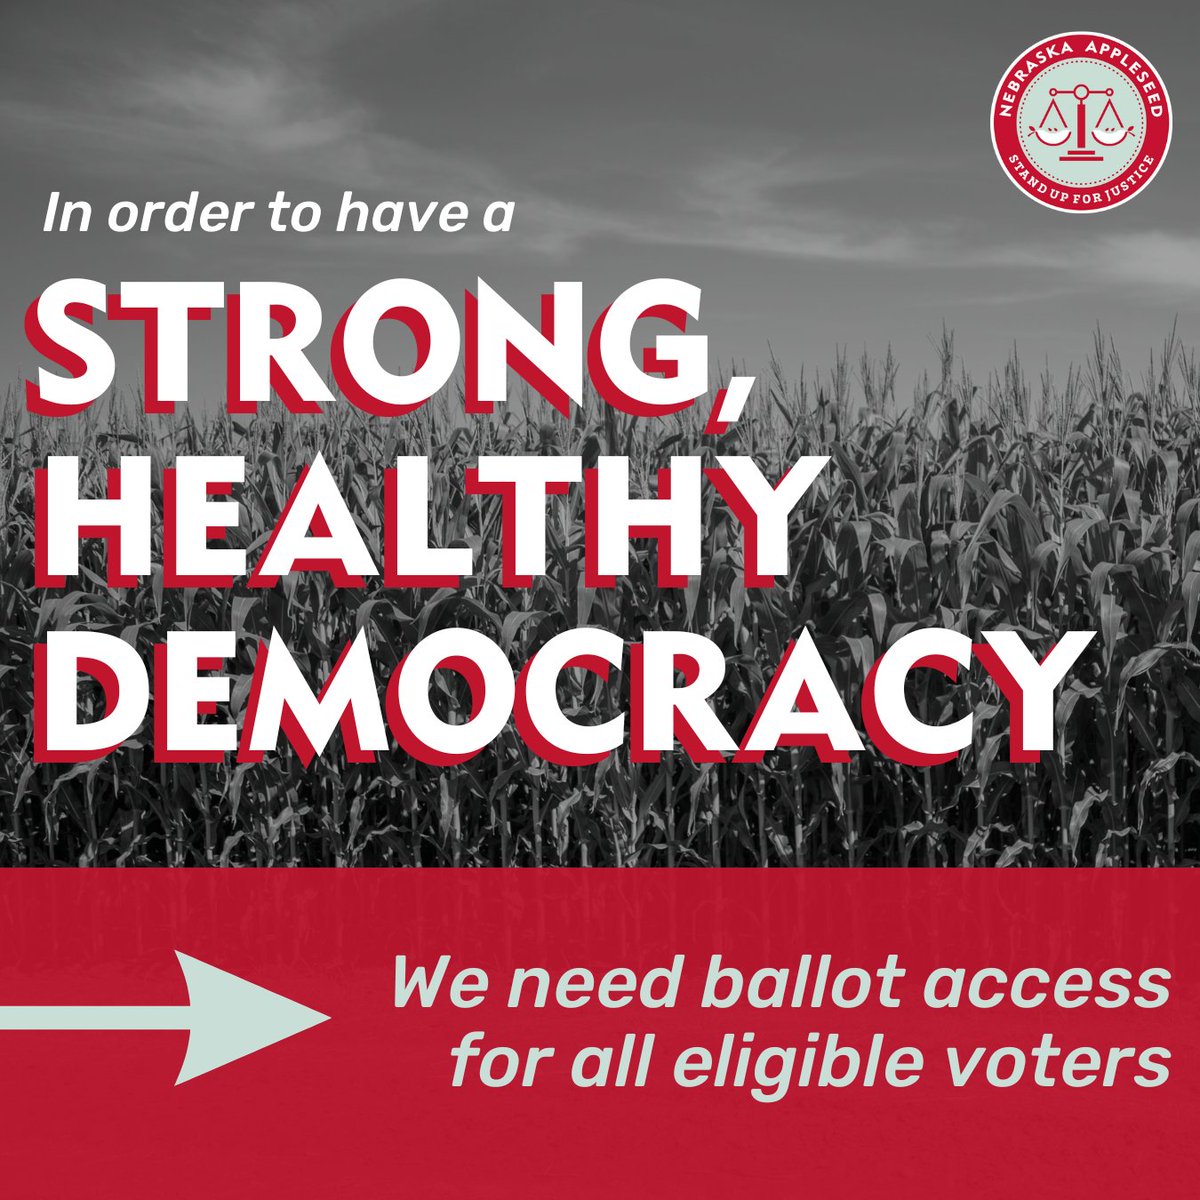 On Monday, #NEleg will be debating a proposal for implementing voter ID requirements in Nebraska elections. We need senators to remember that our elections are already well-trusted. Contact your senator this weekend: bit.ly/NElegSenator